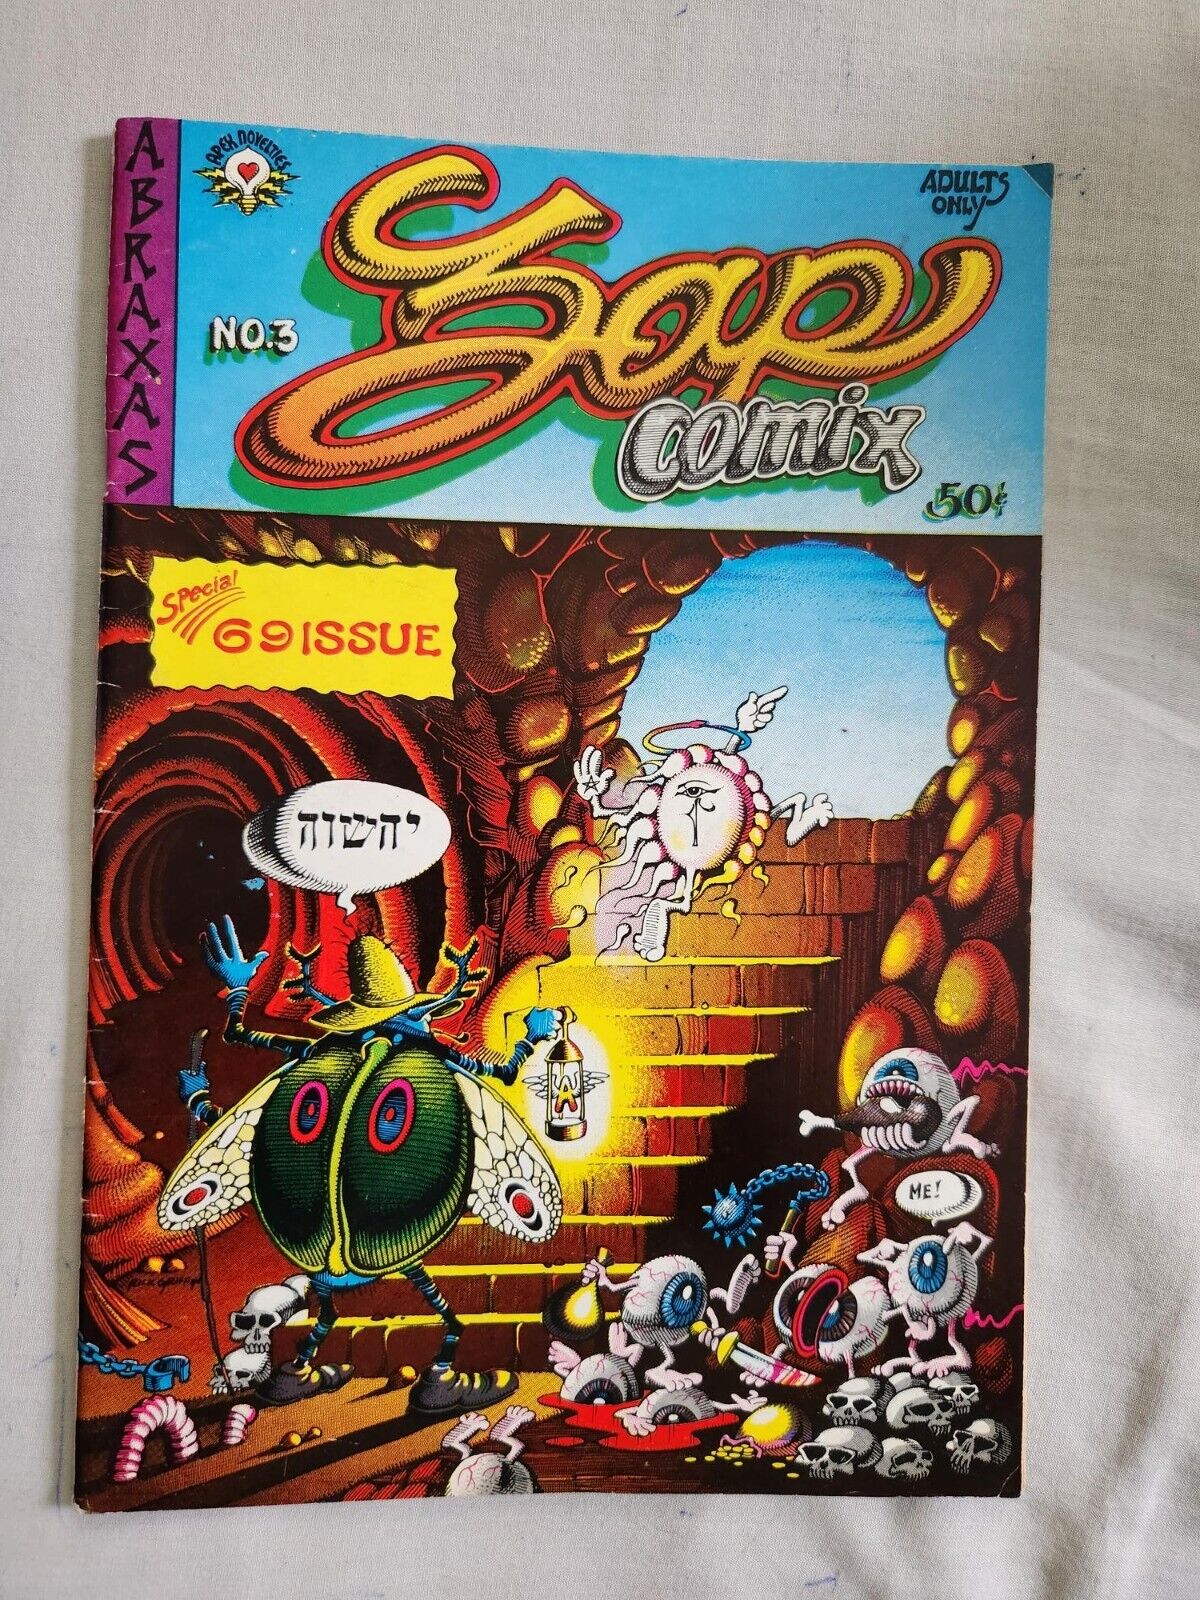 Zap Comix #3 50-Cent Cover Price-Excellent Condition-Very Nice